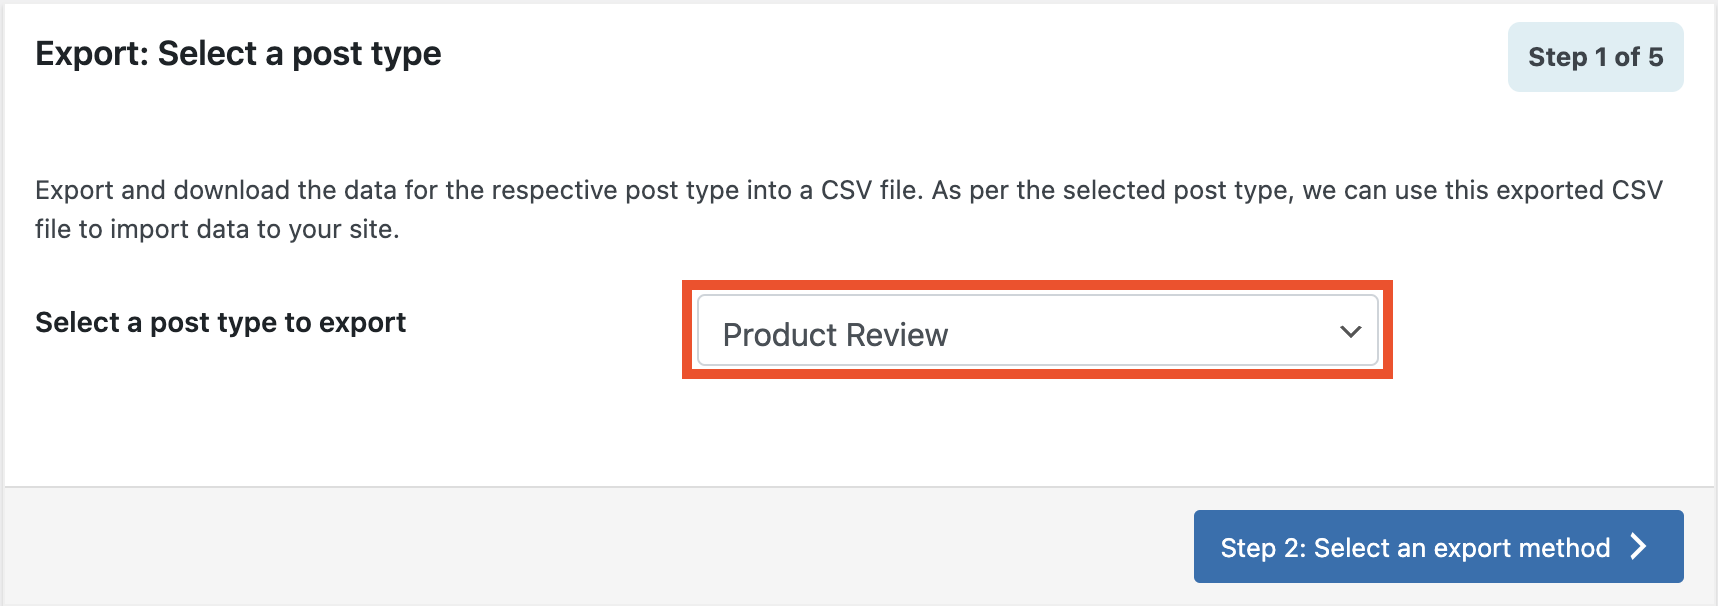 Select Product Review as the post type to export